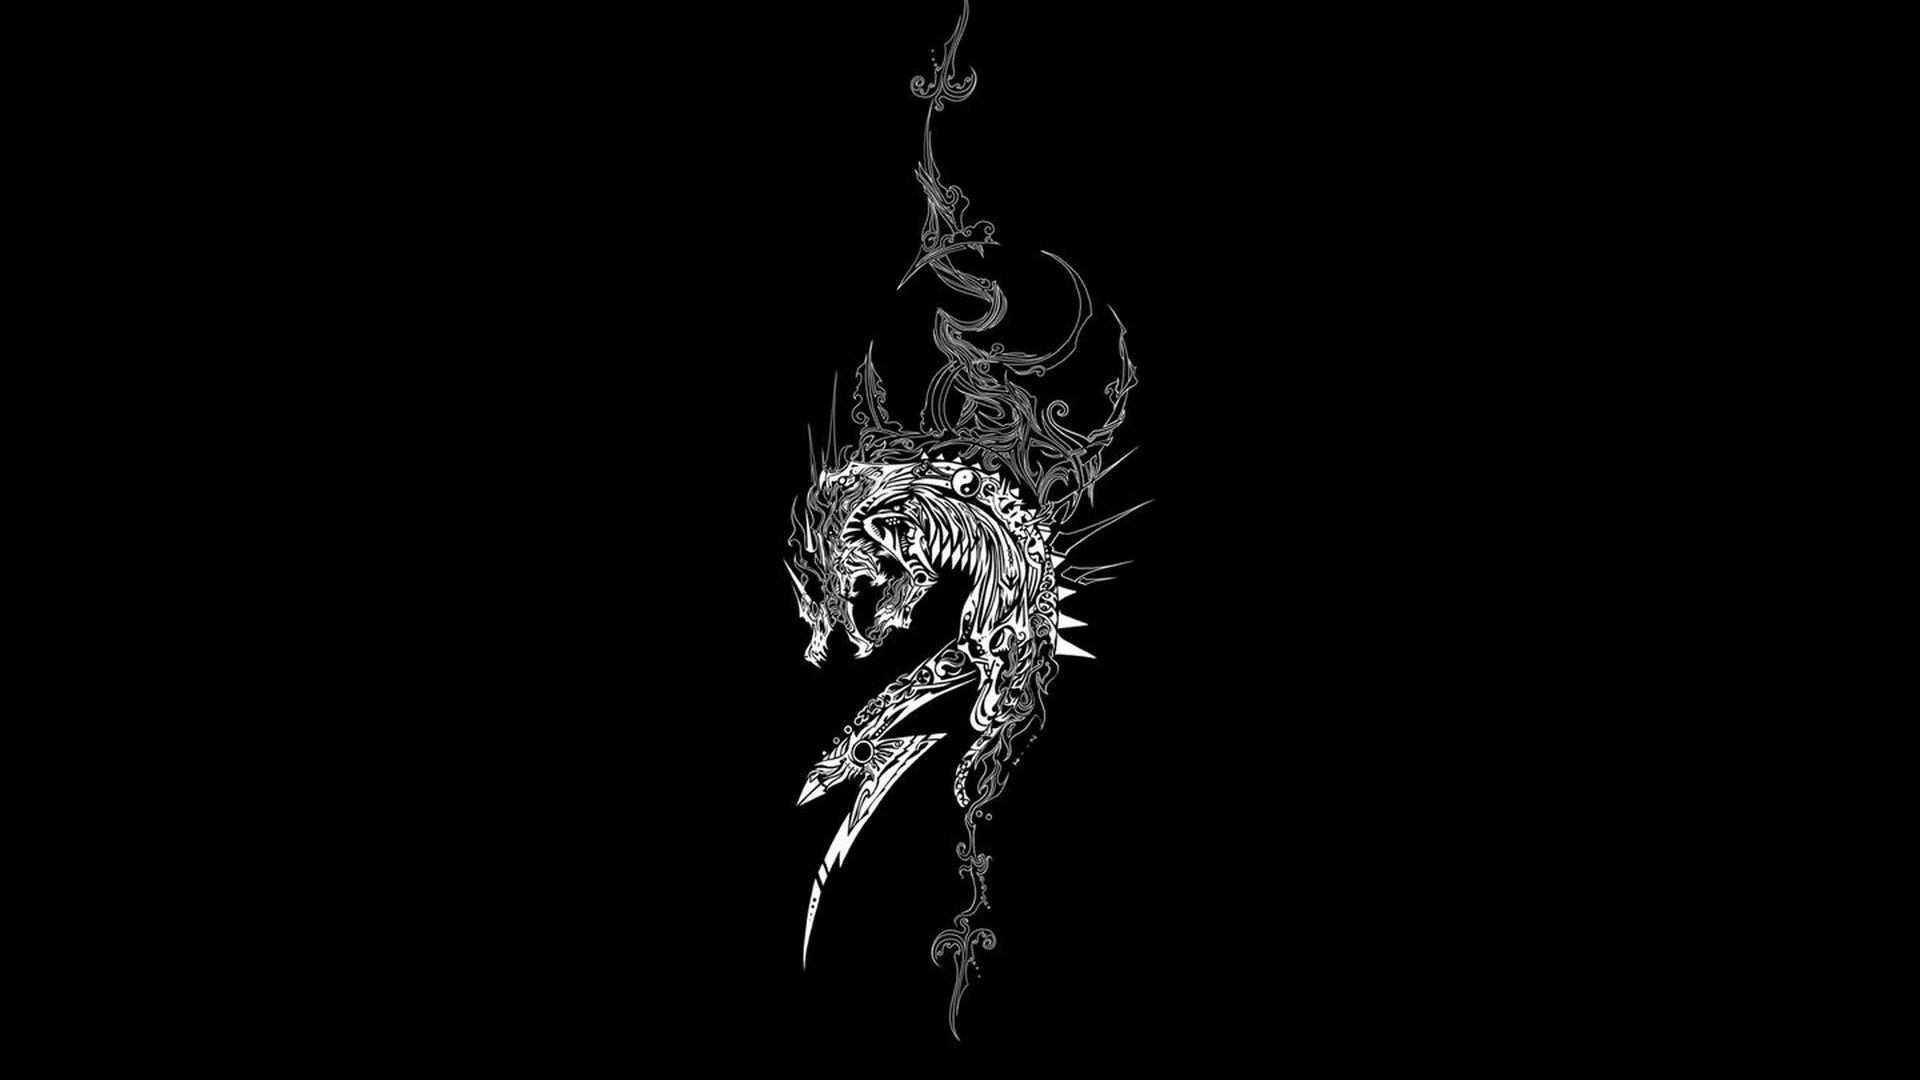 Black and White Dragon Sketch. Wallpaper in 1920x1080 Resolution